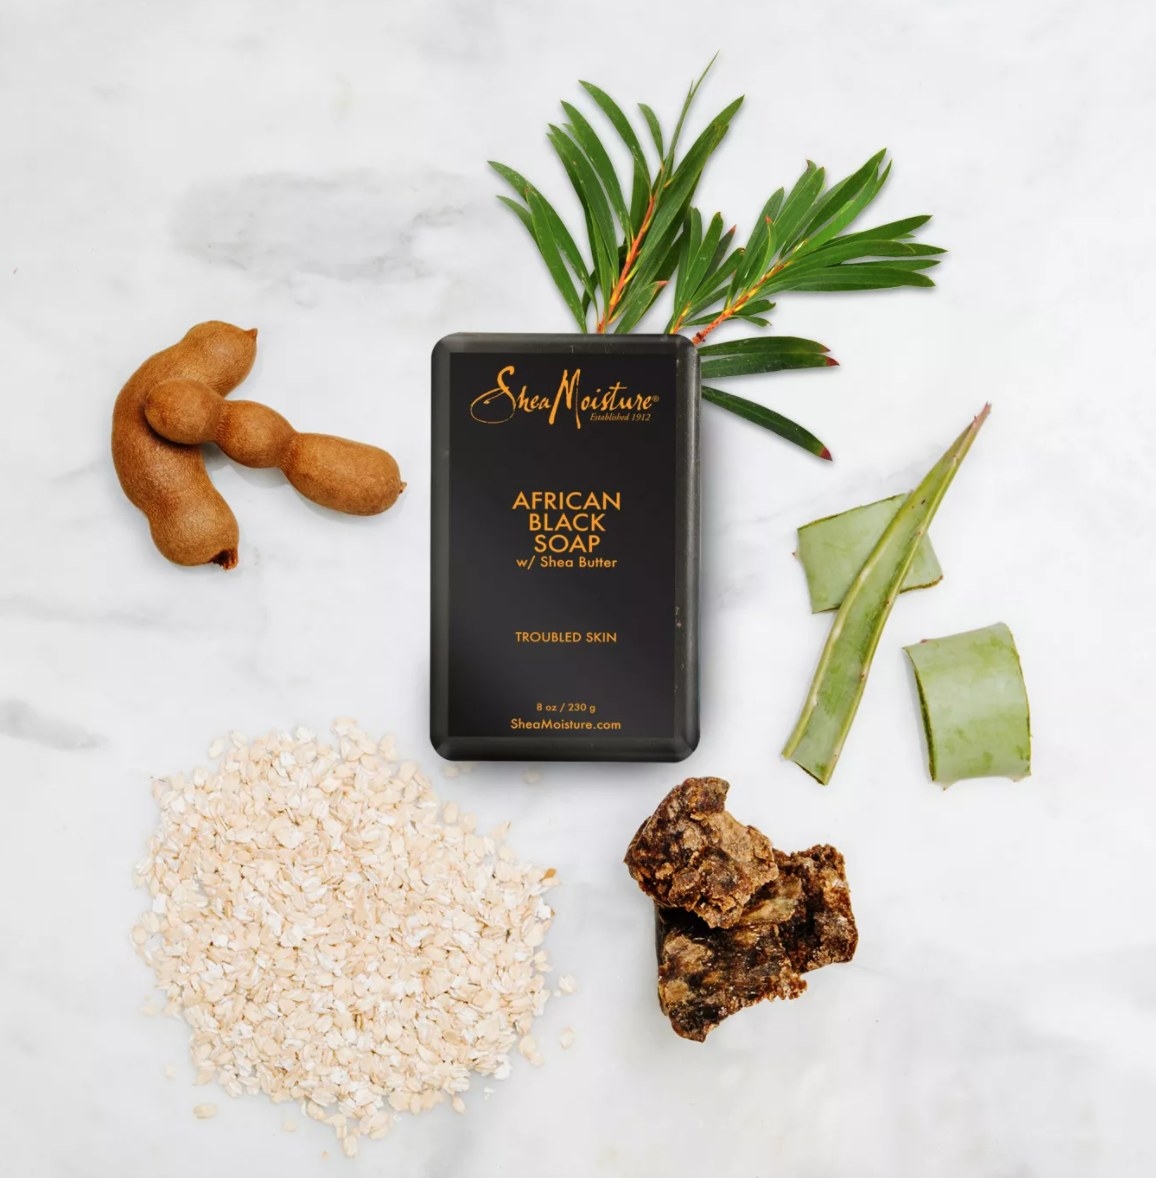 African black soap next to its plant ingredients like aloe and plantain peel